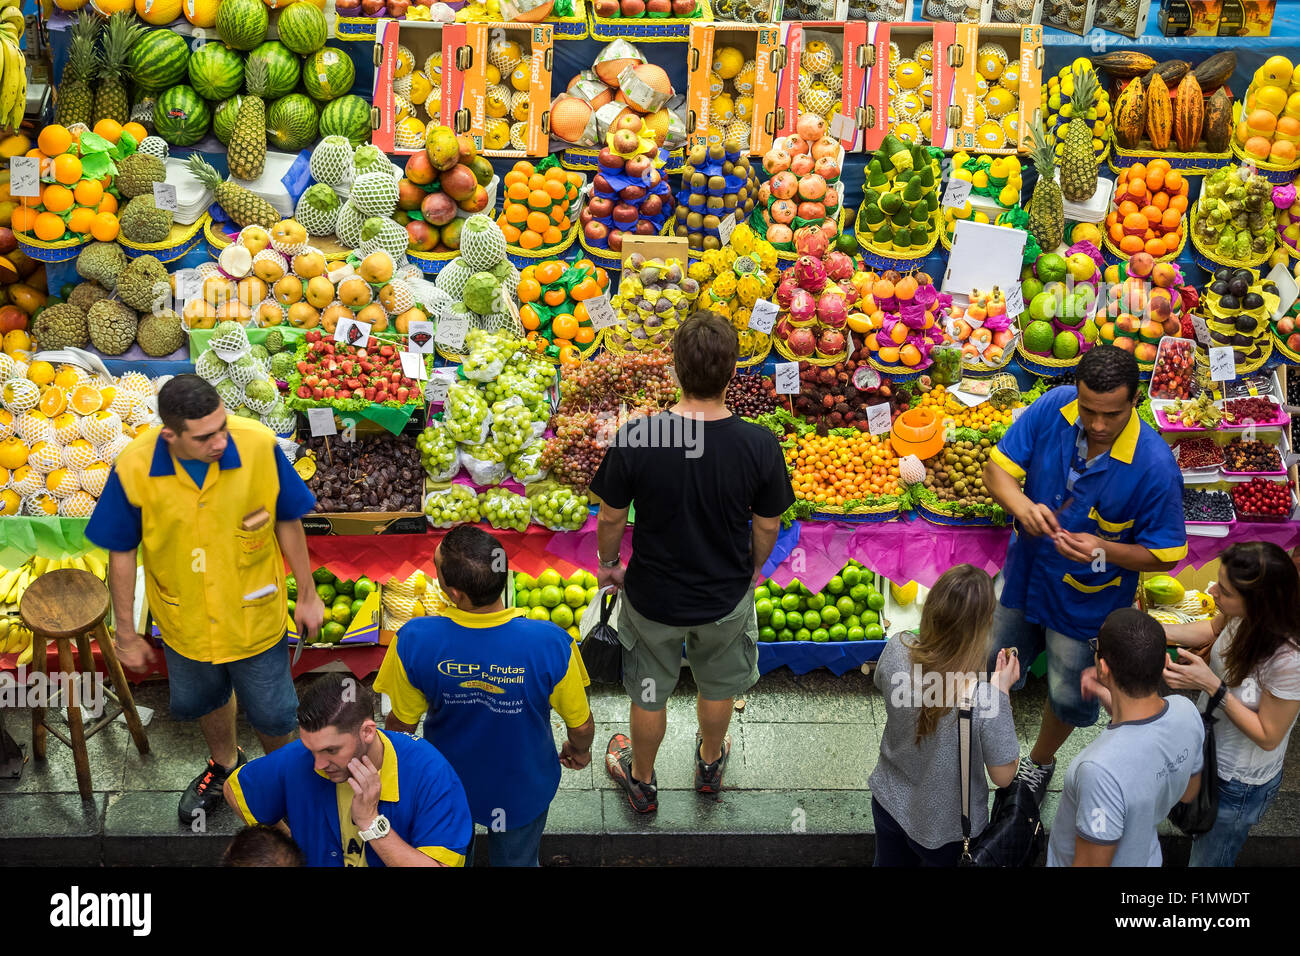 People grocery shopping at the traditional Municipal Market (Mercado Municipal), or Mercadao, in Sao Paulo, Brazil. Stock Photo